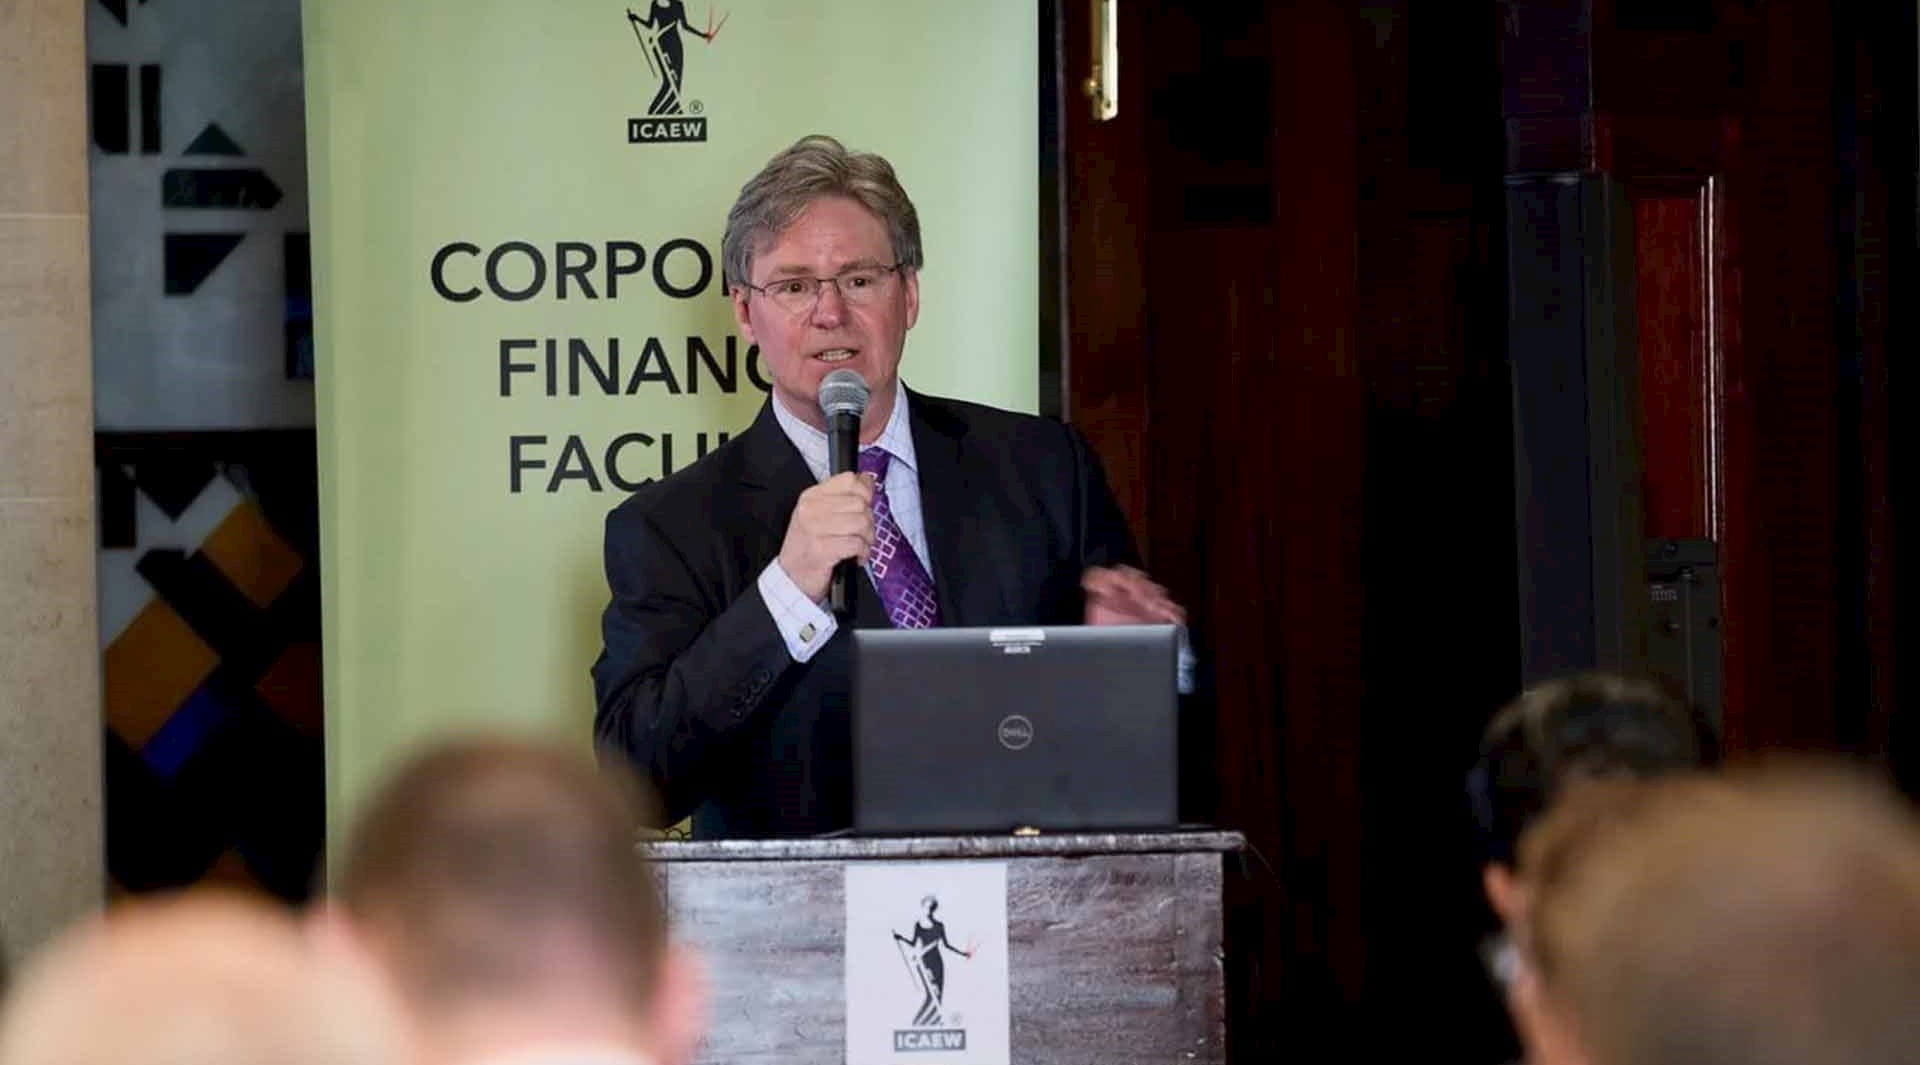 David Petrie, head of corporate finance, speaking at the AGM annual general meeting ICAEW Corporate Finance Faculty Chartered Accountants Hall